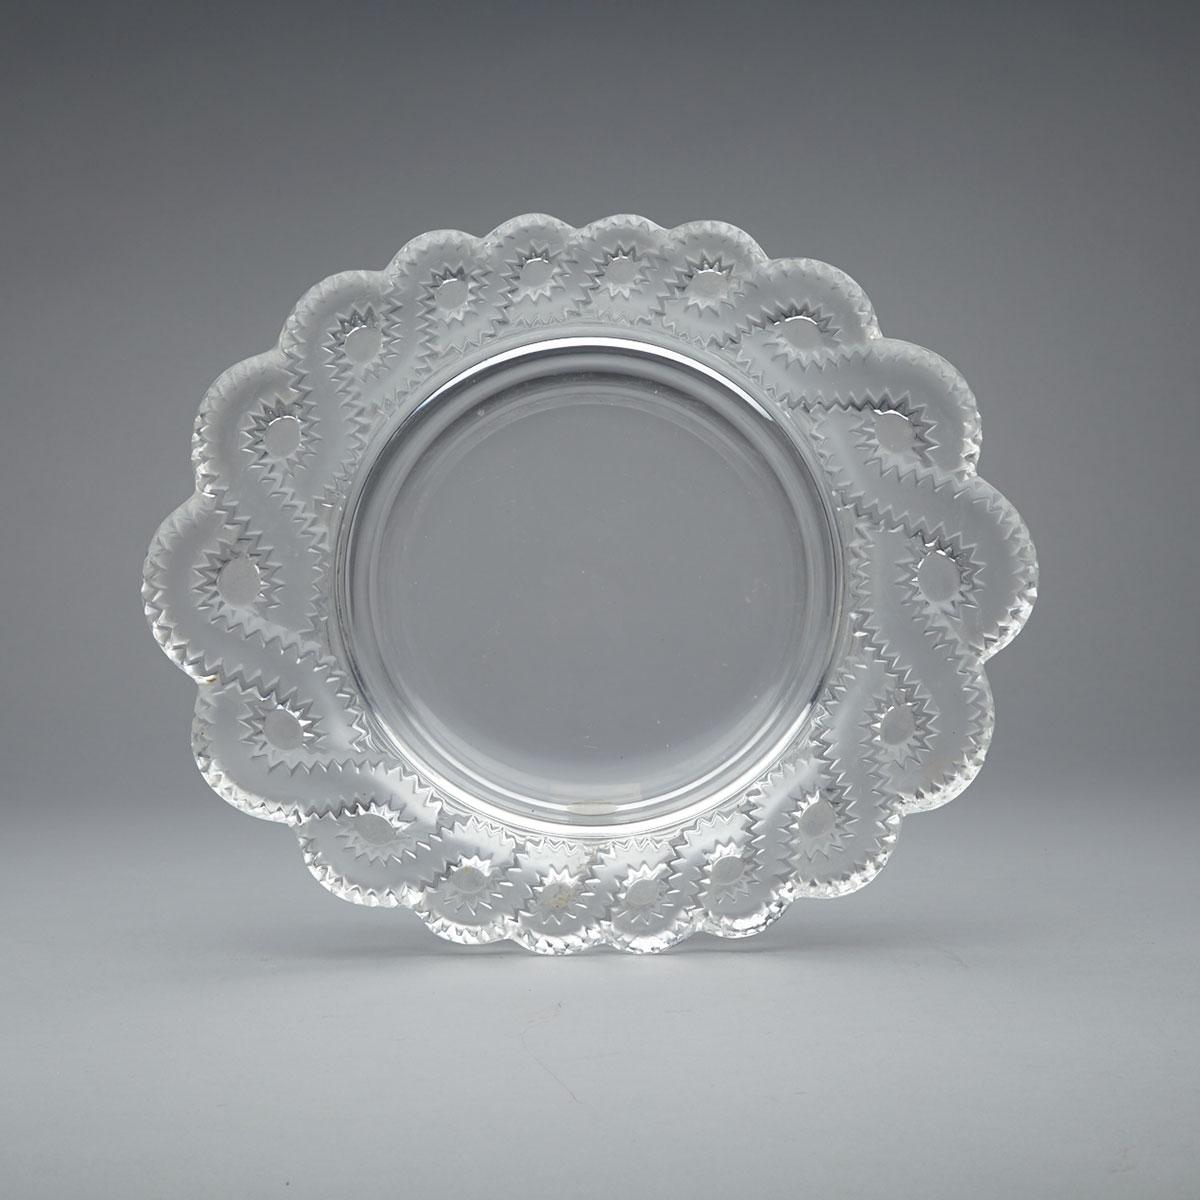 ‘Auriac’, Lalique Moulded and Partly Frosted Glass Bowl, post-1945